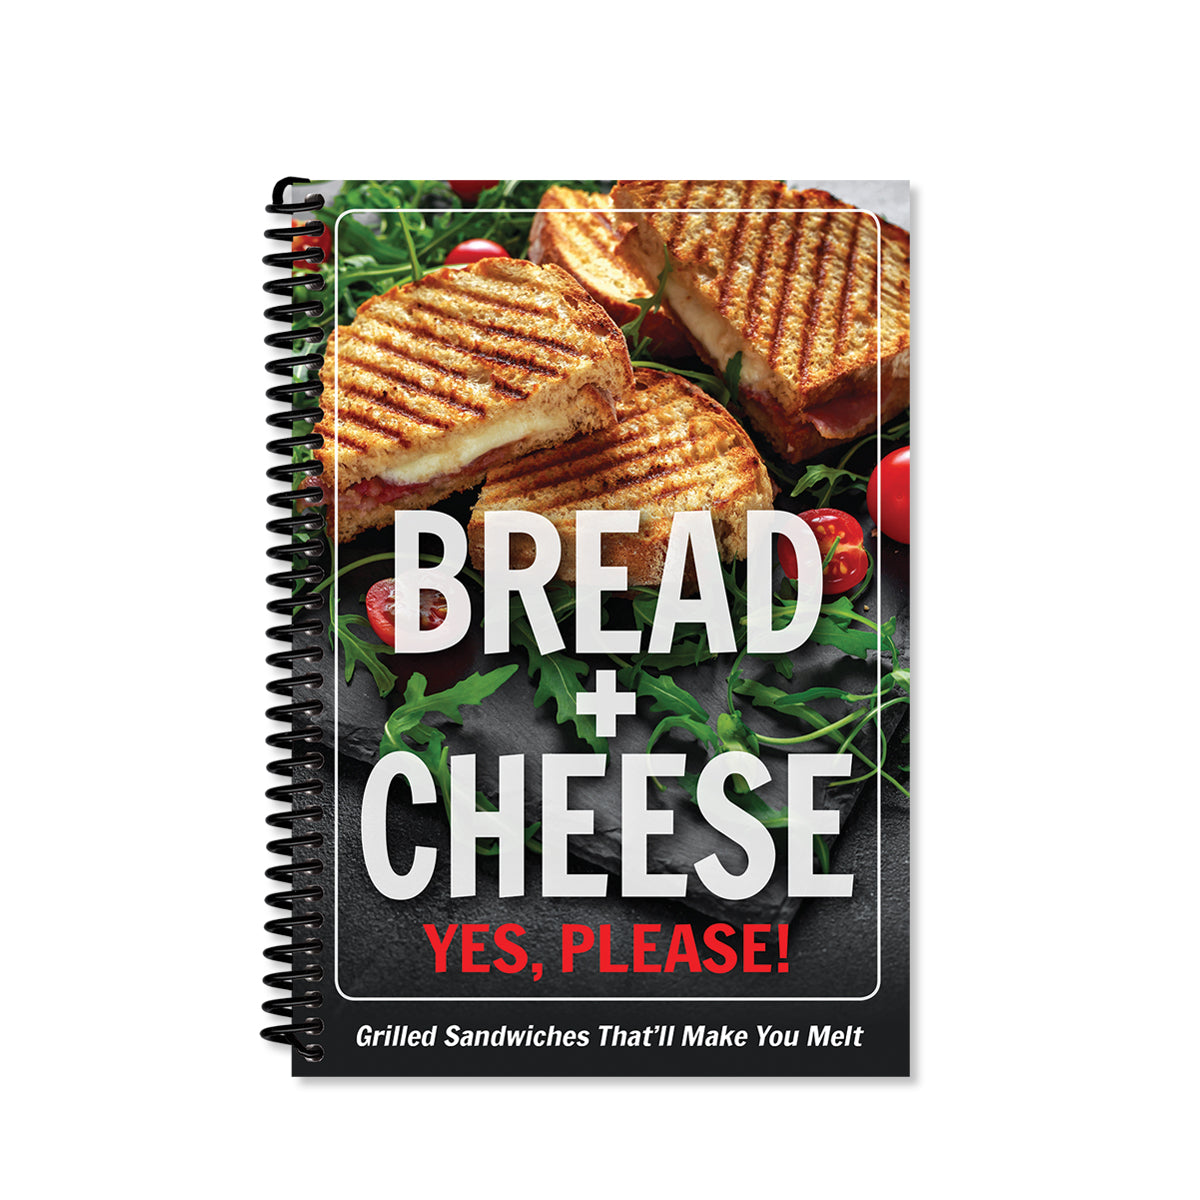 Bread and Cheese Book Cover. Grilled Sandwiches that will make you melt.